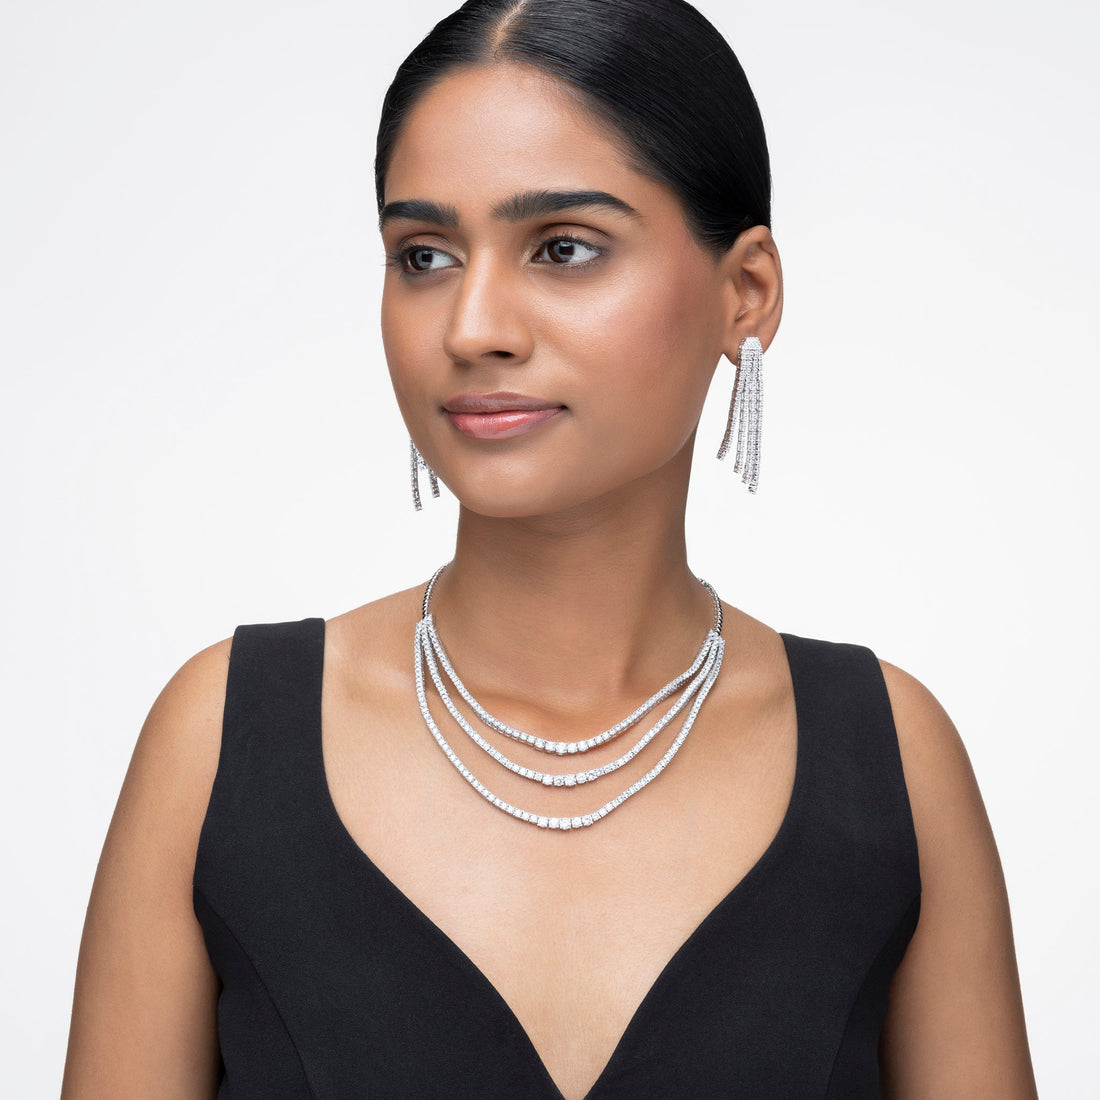 PRAO's Triple Tiered Necklace Set